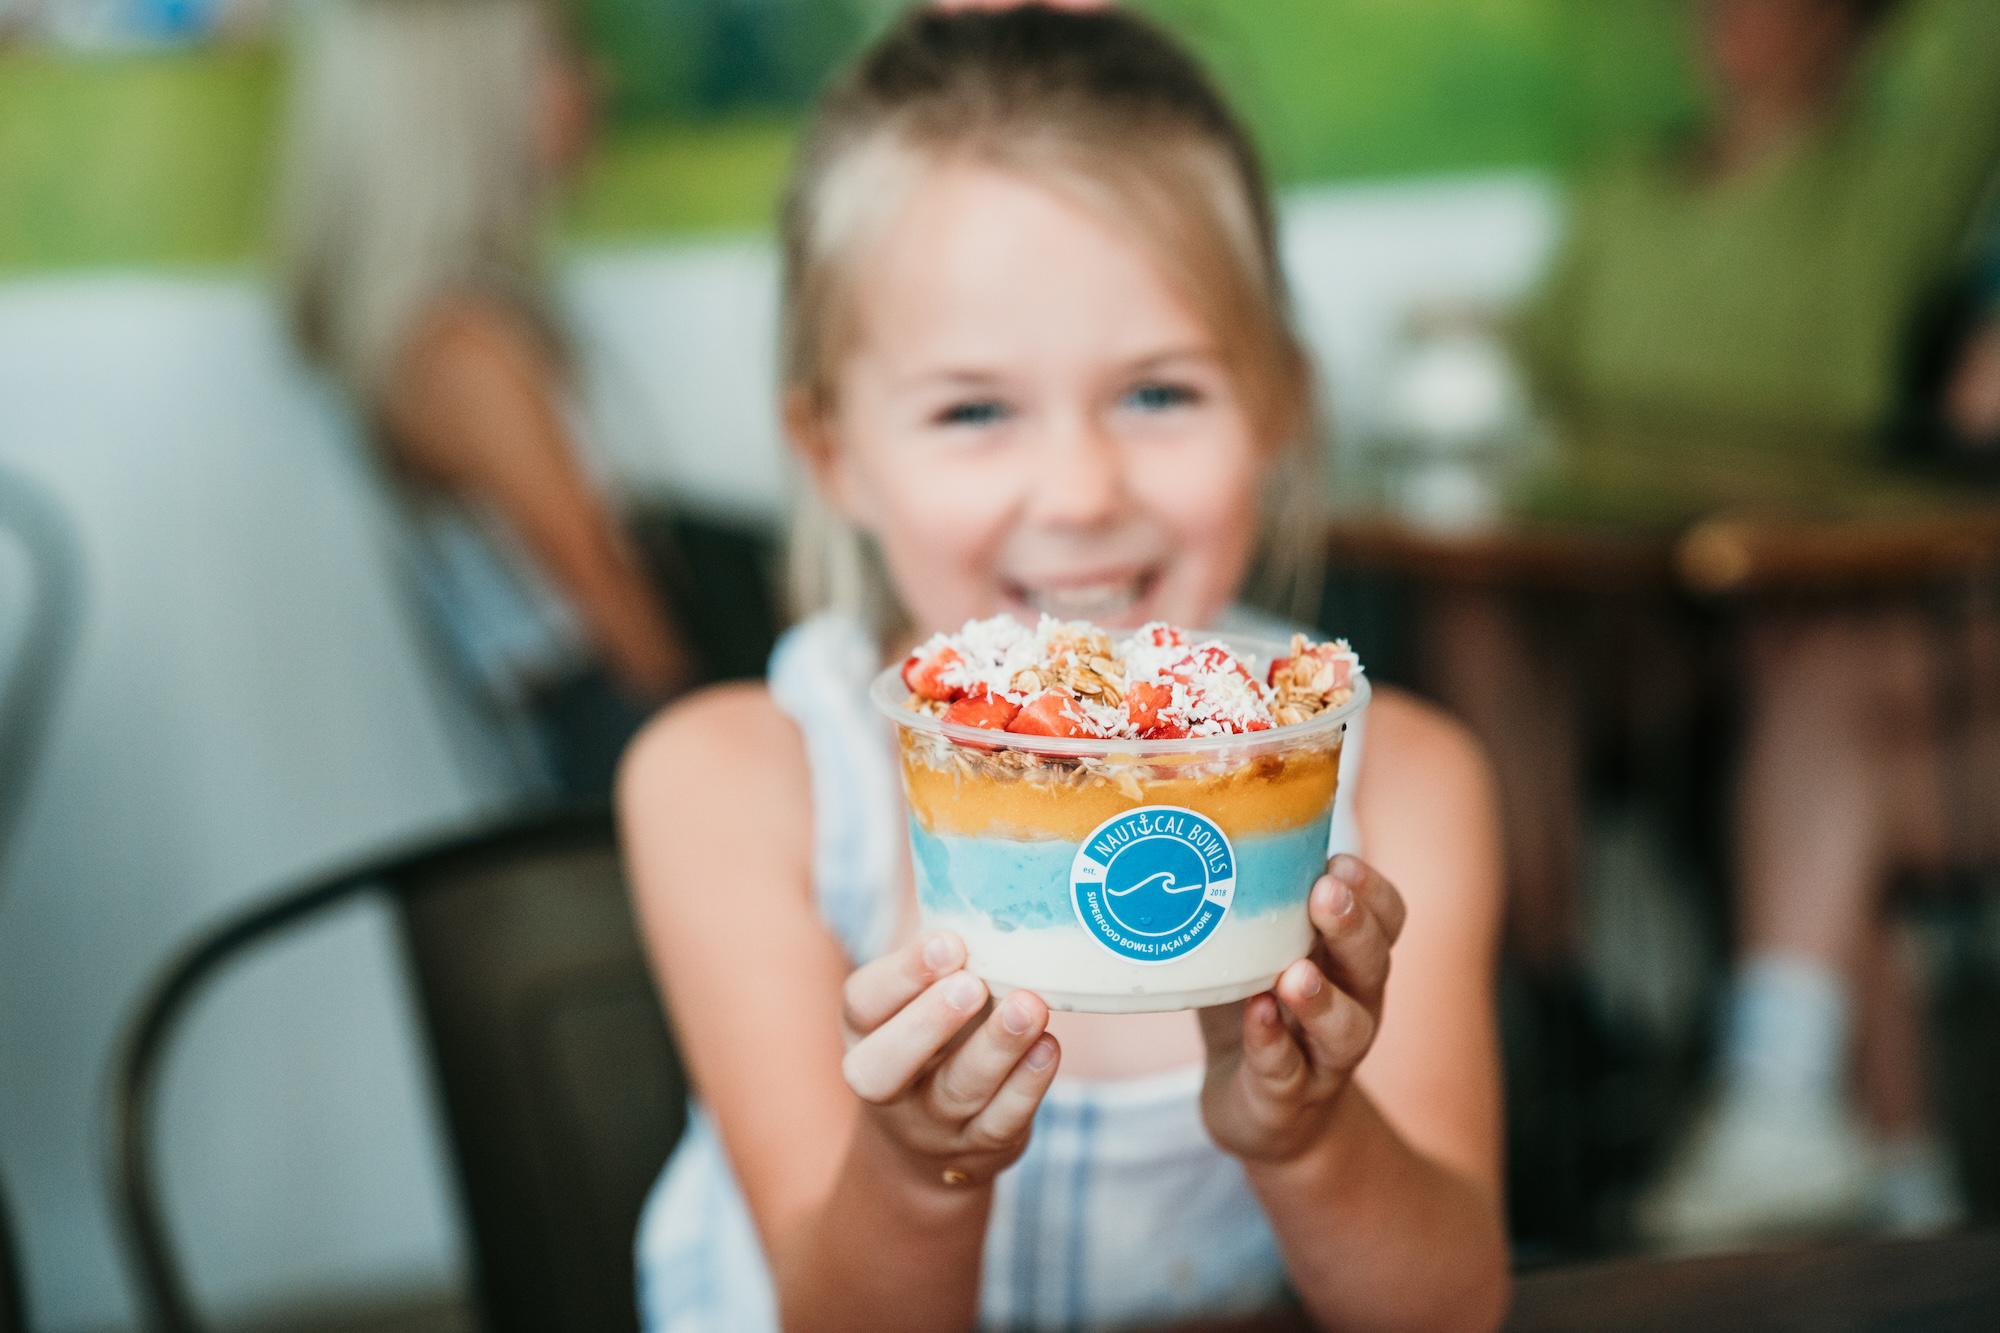 A vacation in a bowl! The Paddle Bowl is a crowd favorite with its many layers of tropical oasis. Combining Blue Majik, Coconut and Mango bases with crunchy granola, strawberries, coconut flakes & a swirl of honey, this bowl is sure to leave you full and excited for your next visit!